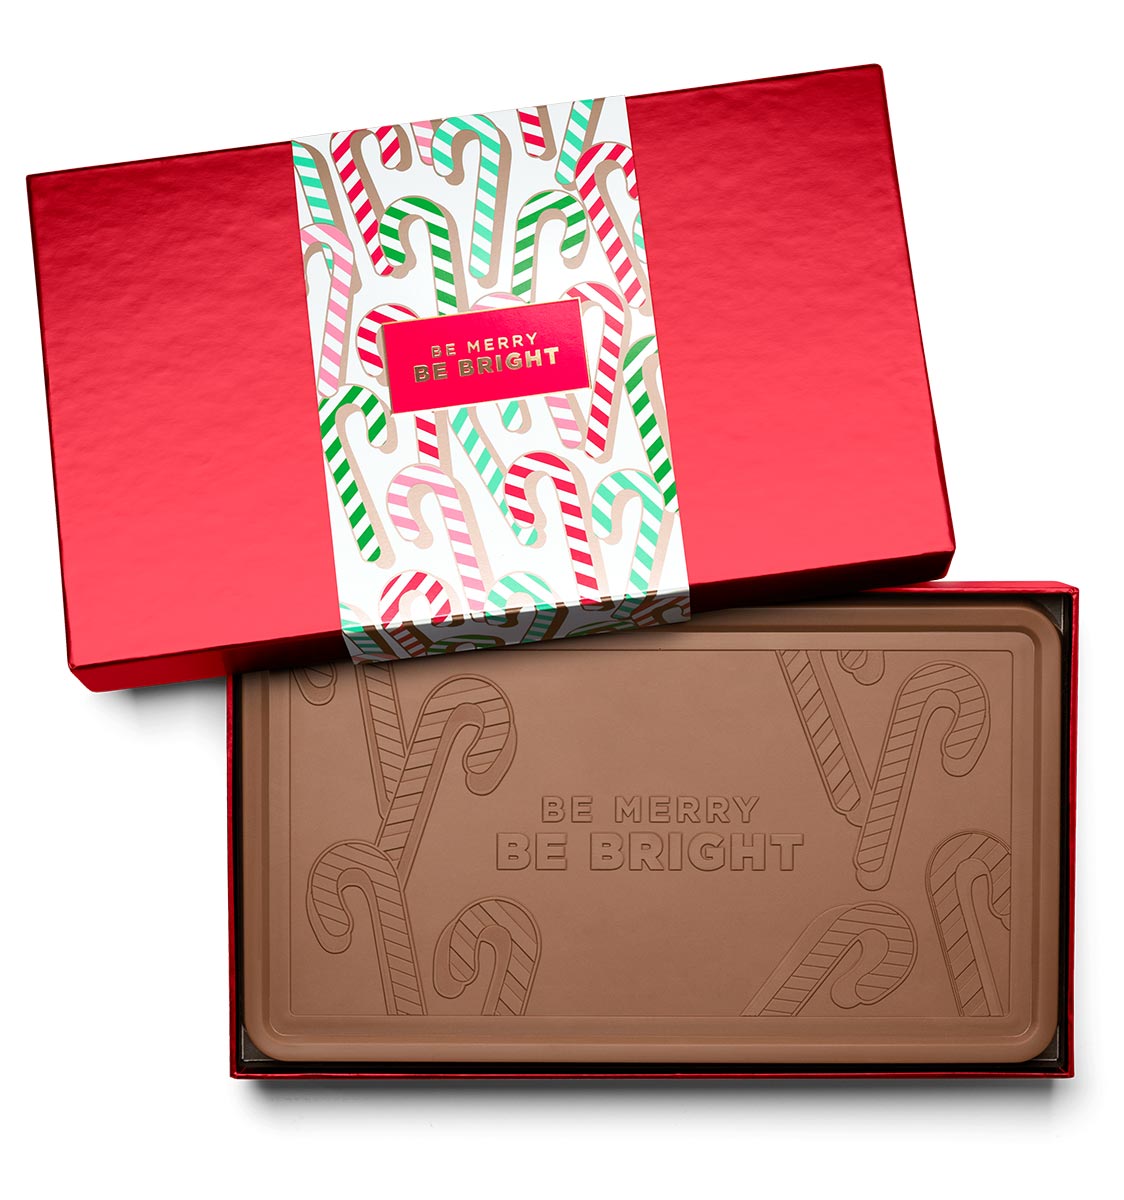 ready-gift-chocolate-RTG-1001-candy-cane-indulgent-bar-featured